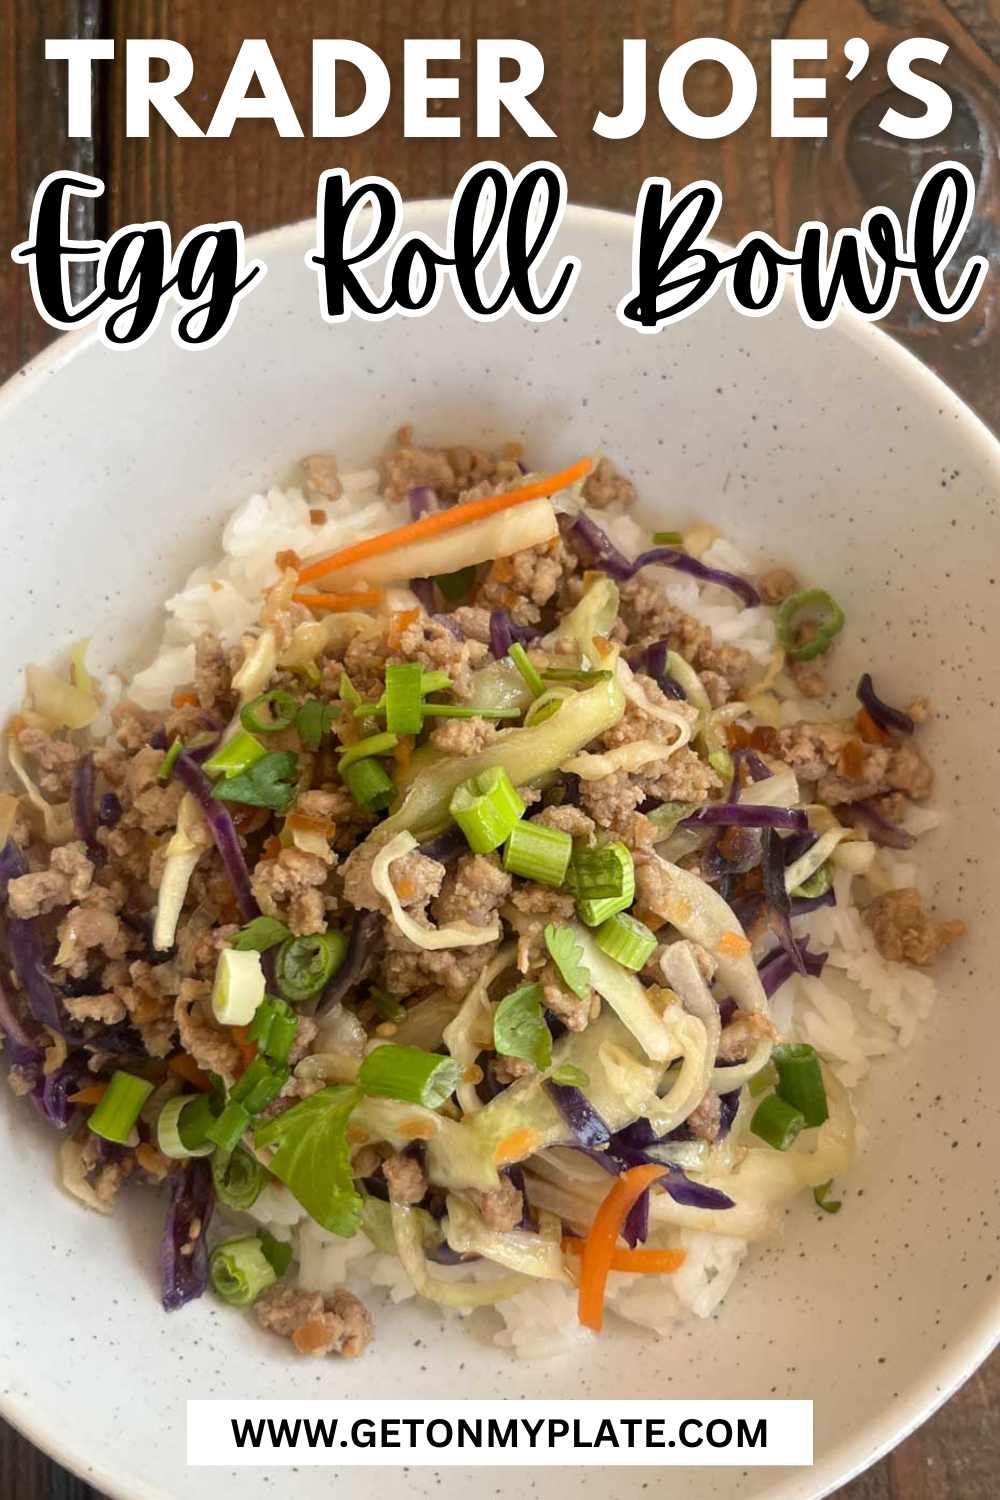 Pintrest Pin for Trader Joe Egg Roll Bowl with text.